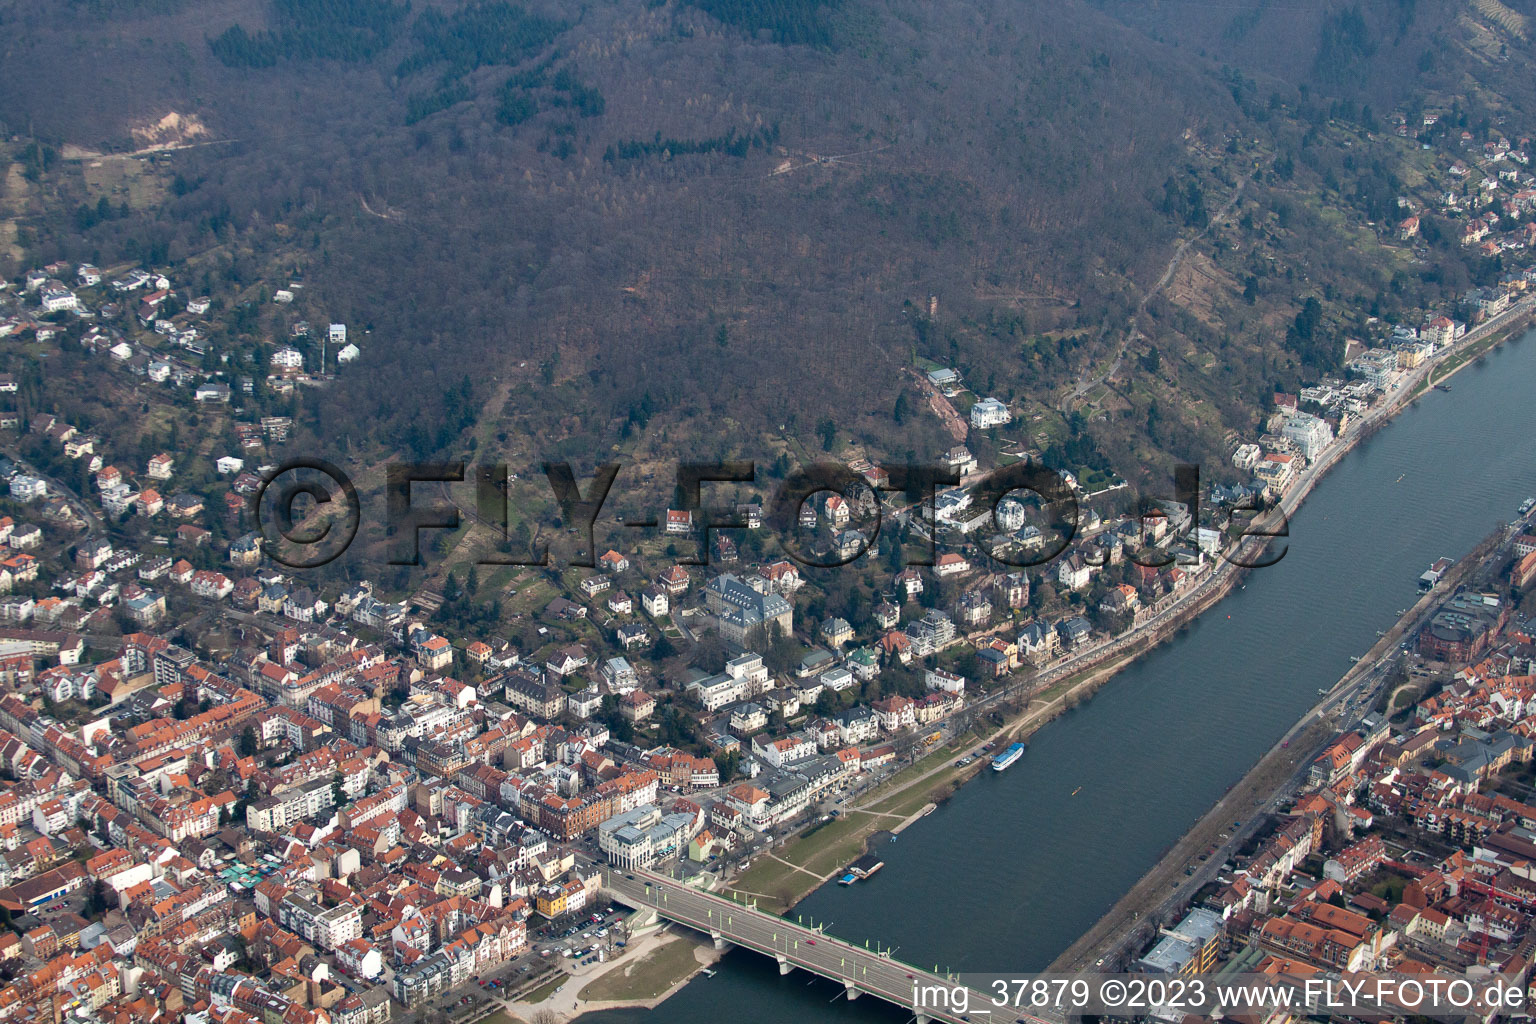 Aerial view of Philosopher's path in the district Neuenheim in Heidelberg in the state Baden-Wuerttemberg, Germany